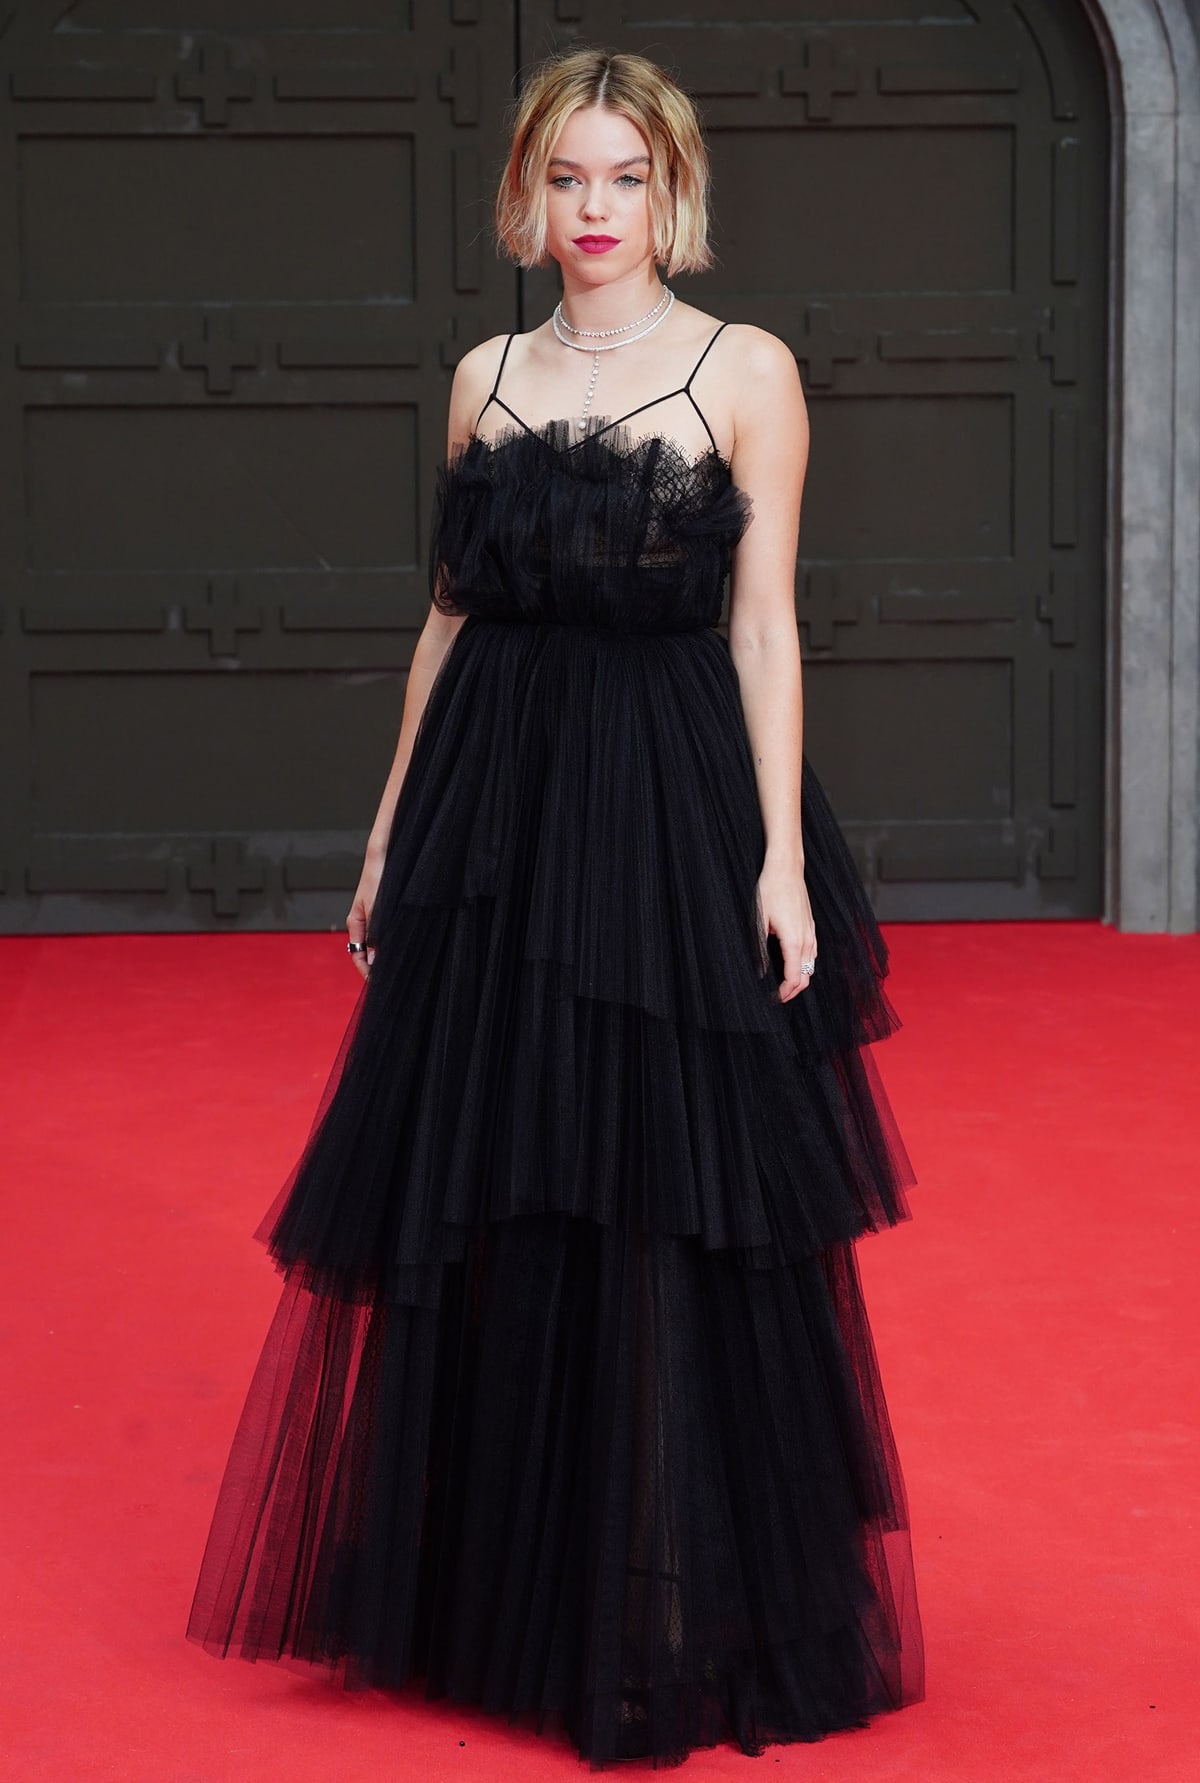 Milly Alcock in a black Saint Laurent Fall 2022 gown at the "House Of The Dragon" Sky Group Premiere